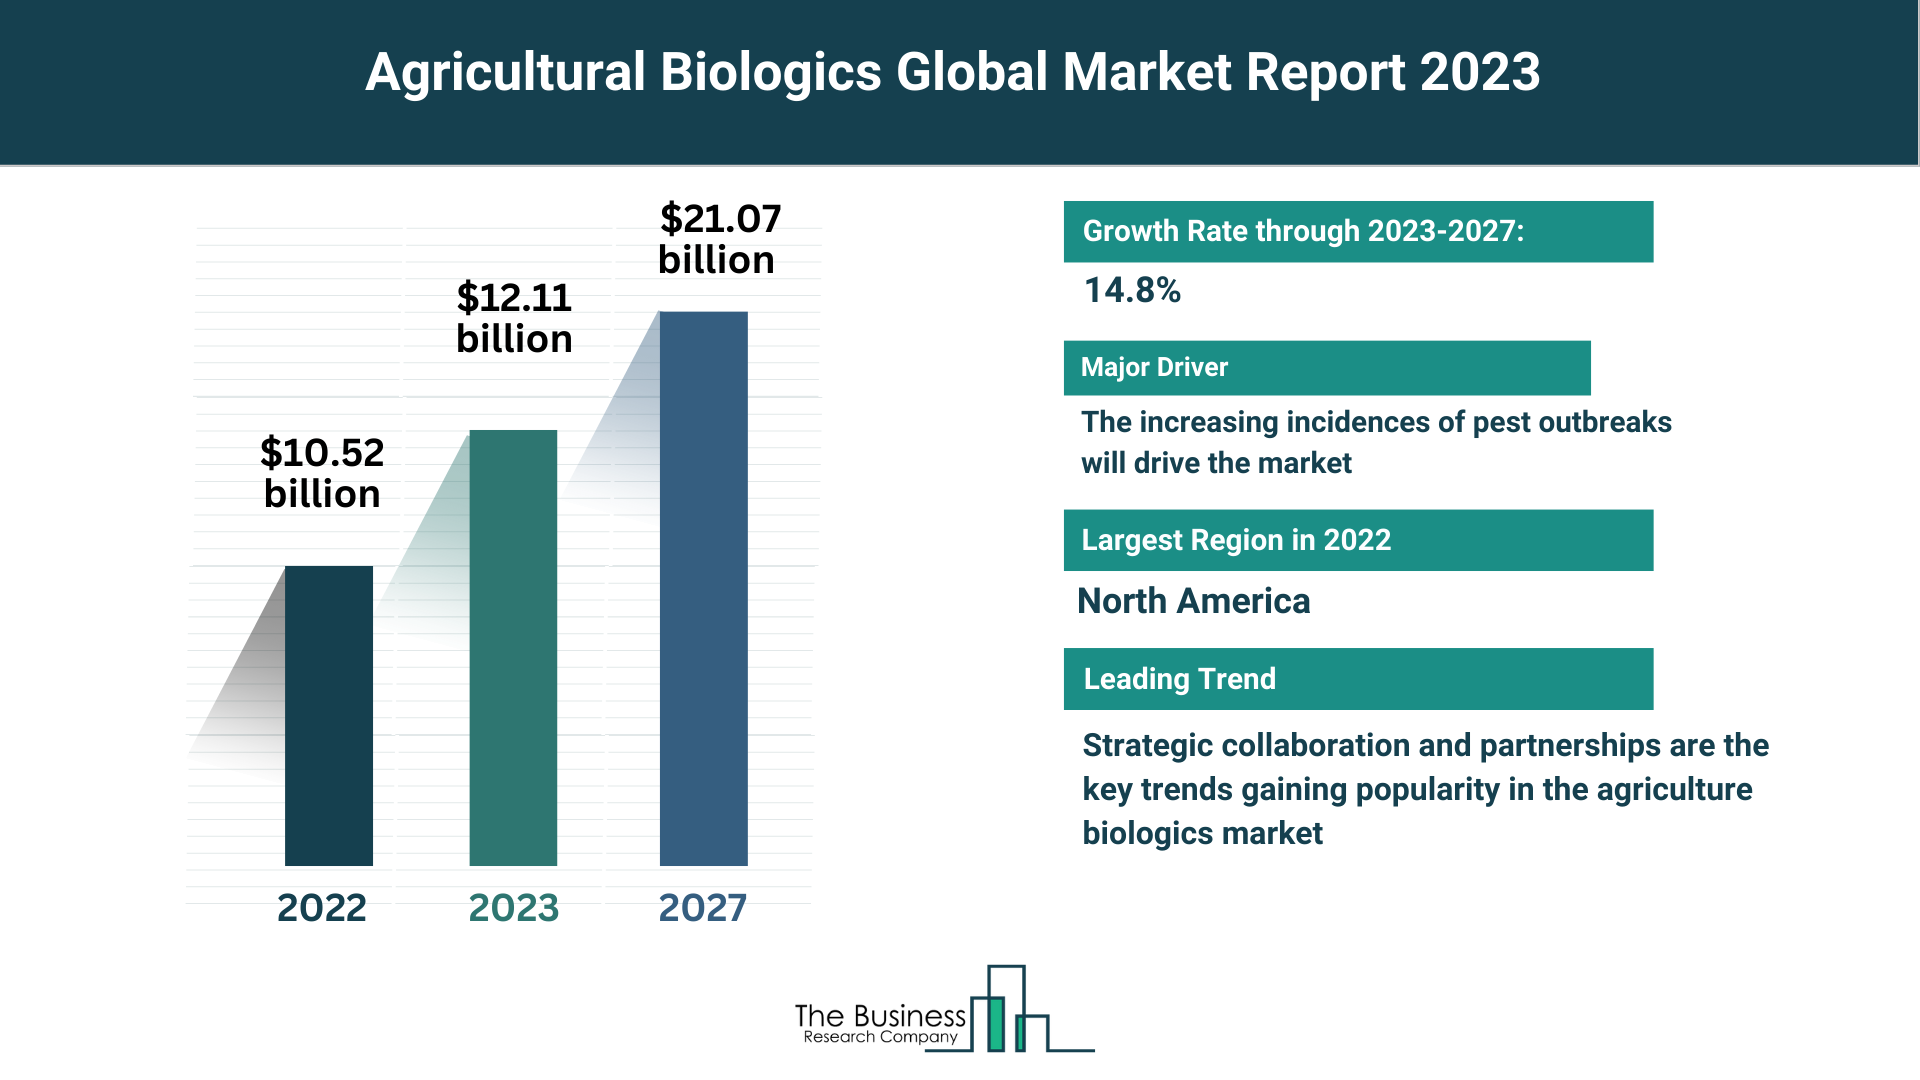 Global Agricultural Biologics Market Analysis: Size, Drivers, Trends, Opportunities And Strategies